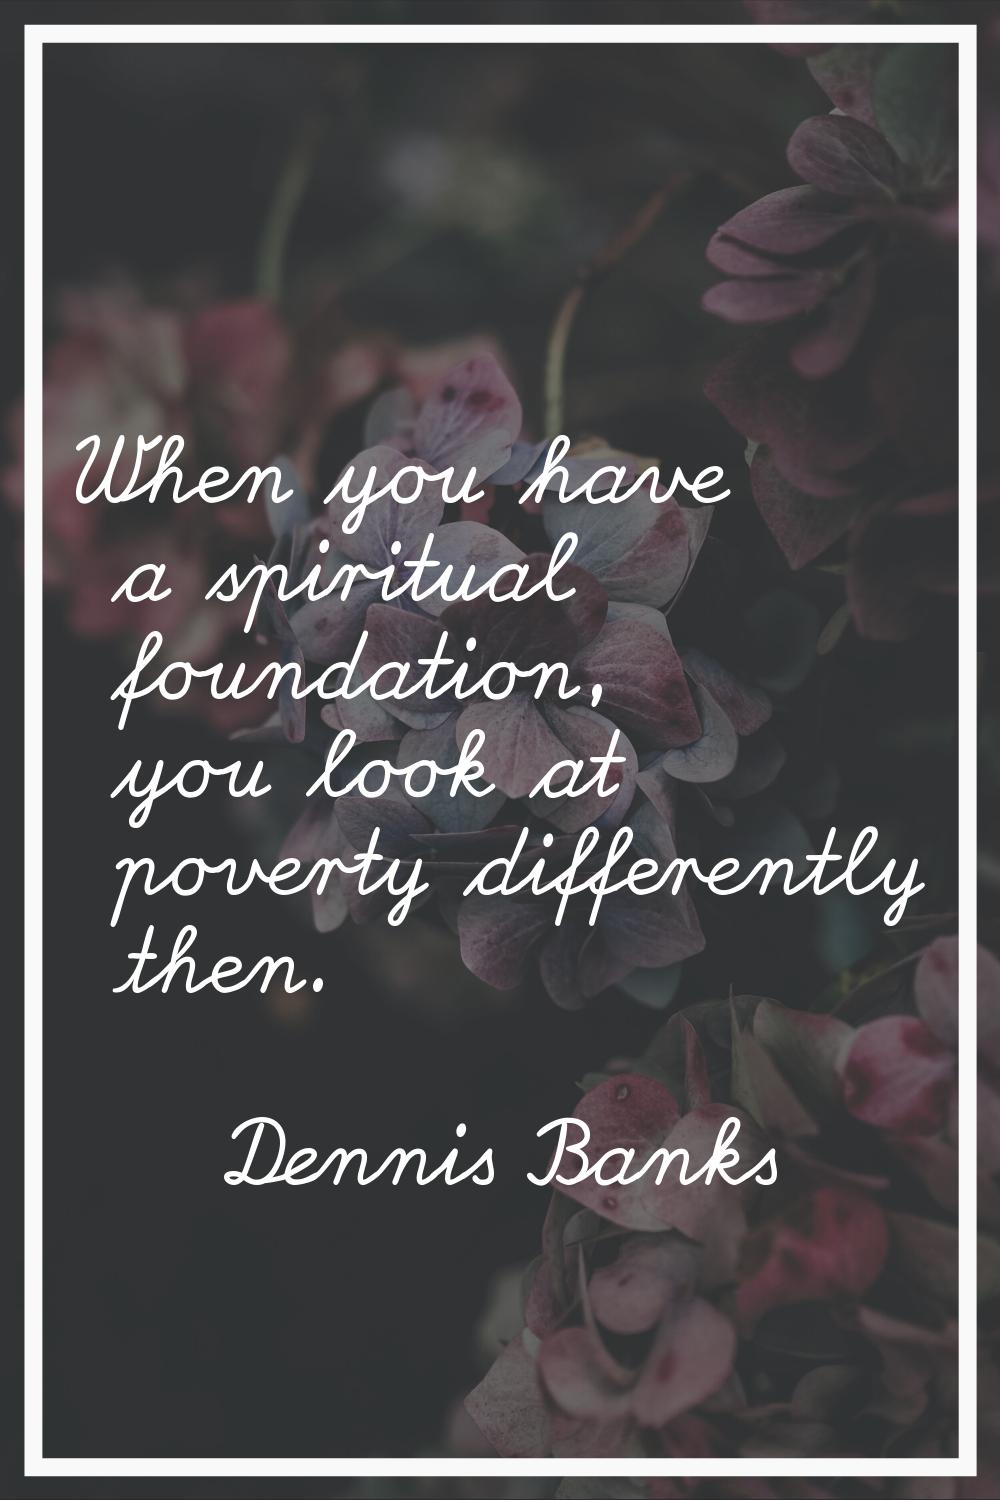 When you have a spiritual foundation, you look at poverty differently then.